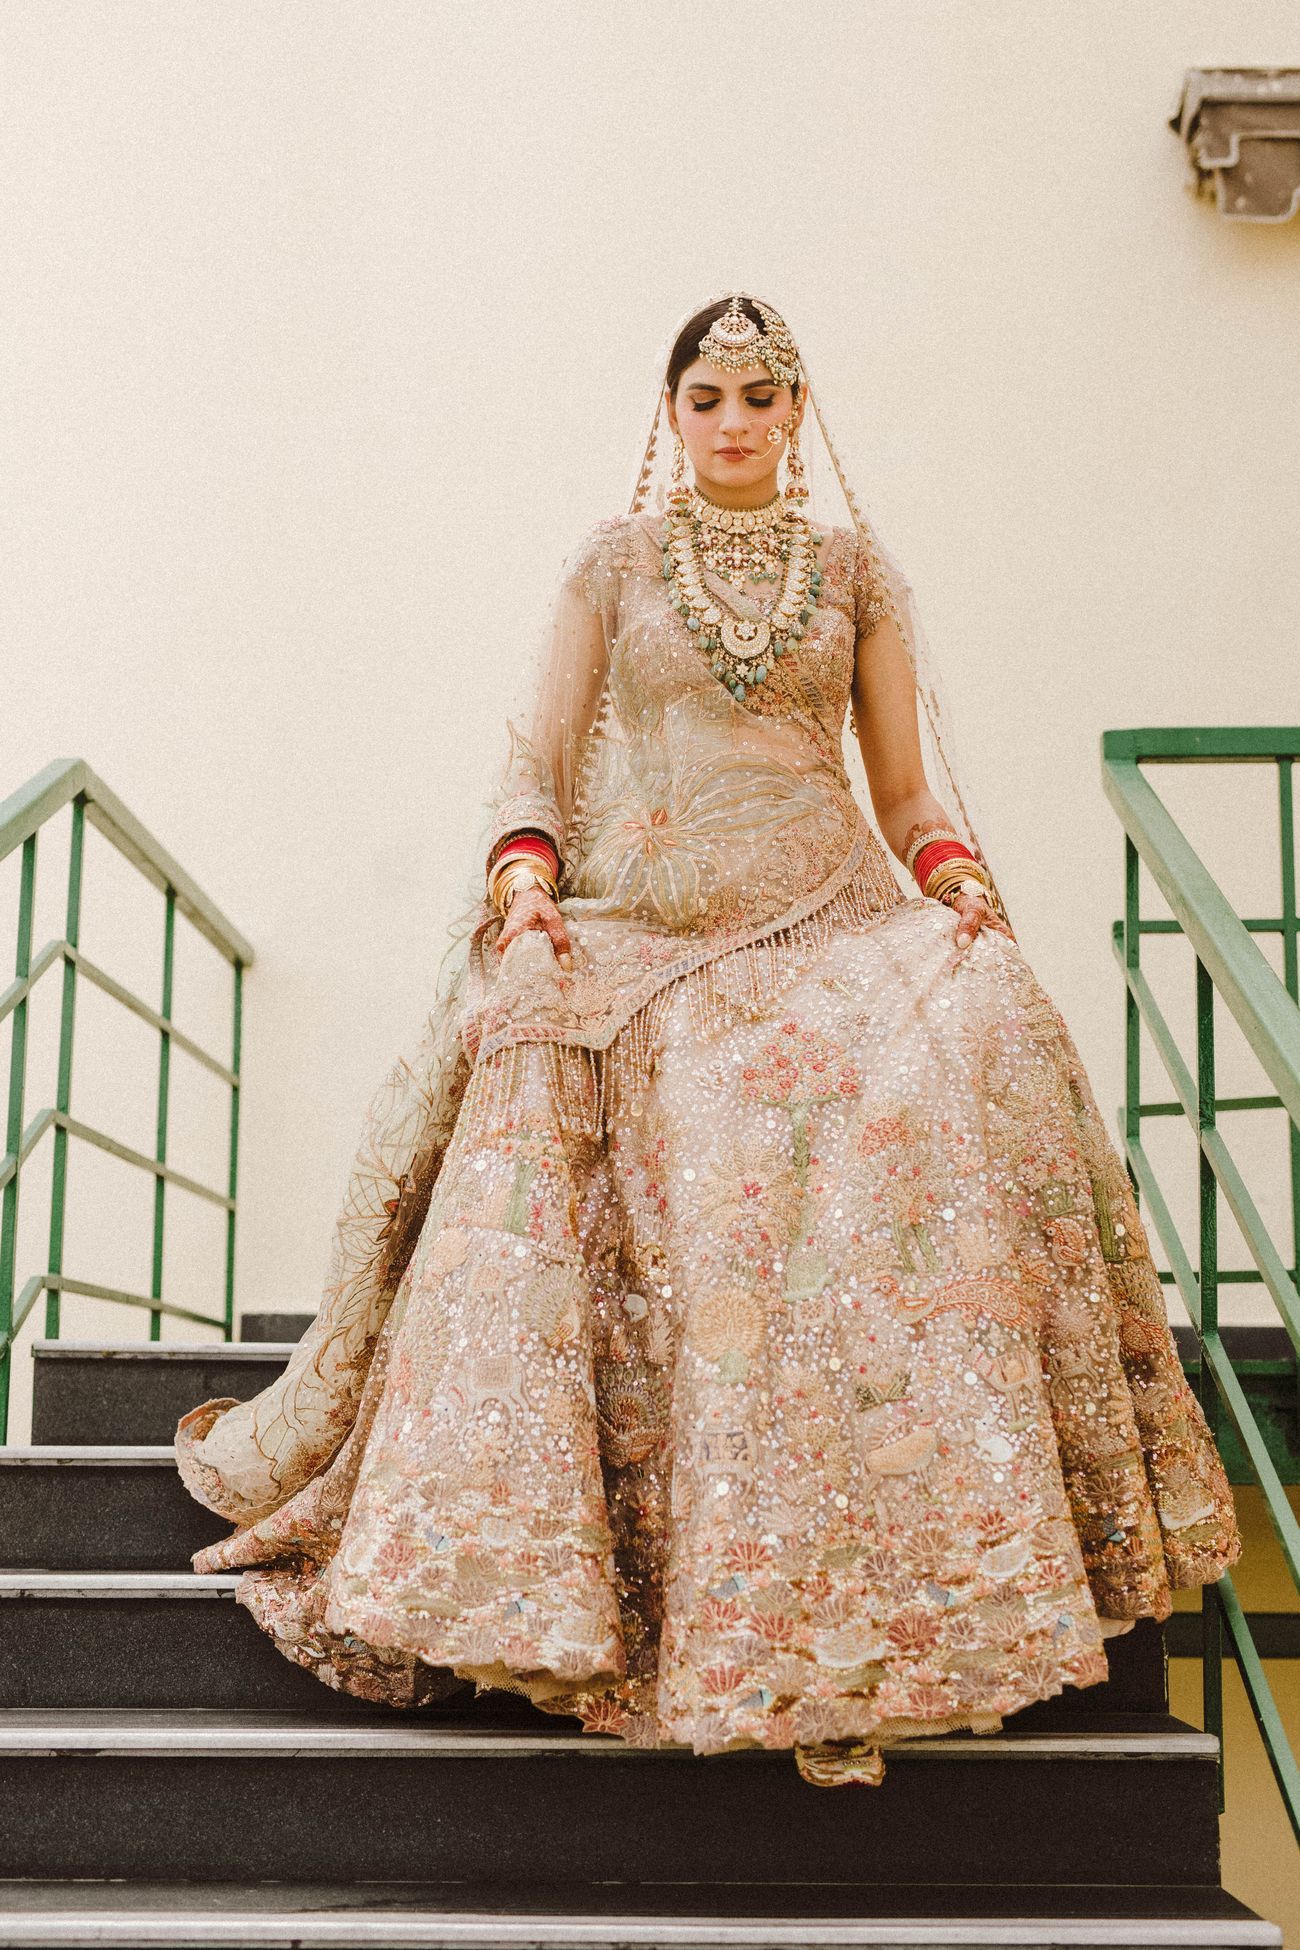 21 Lehenga Trends All 2021/ 2022 Brides Should Know Of!